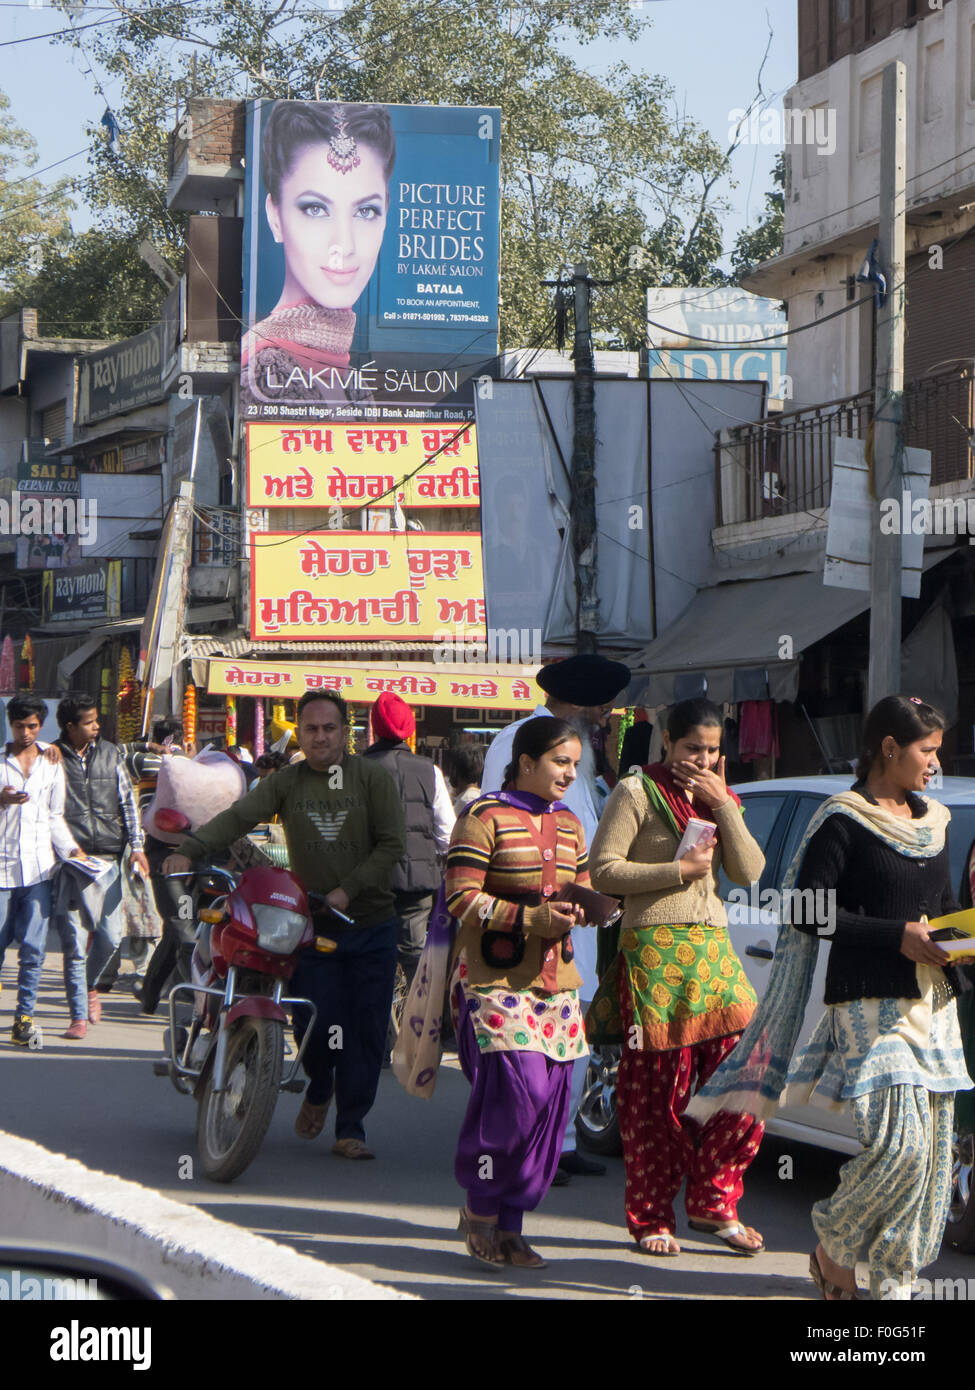 Amritsar, Punjab, India. Street scene; pedestrians passing below an advertisement for 'Picture Perfect Brides' in English with a red and yellow sign in Punjabi below. Stock Photo